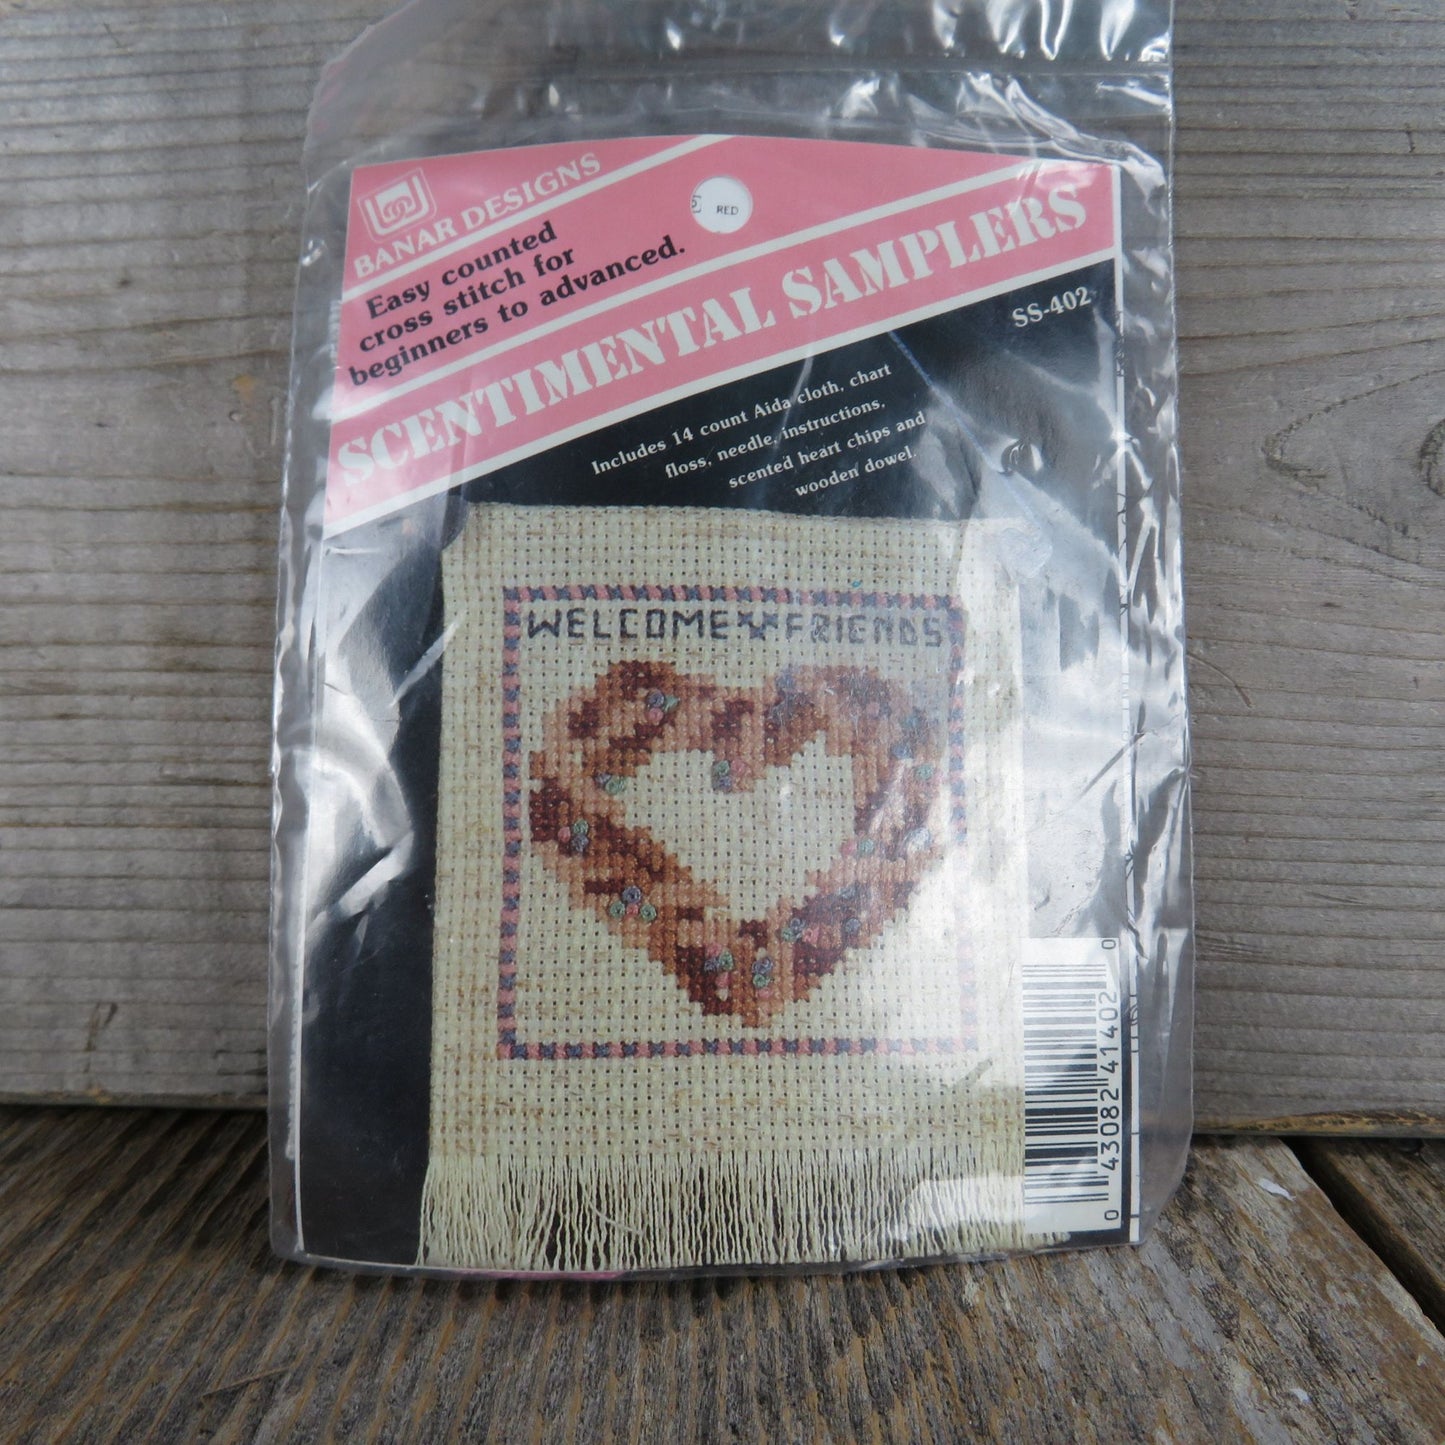 Counted Cross Stitch Kit Welcome Friends Heart Sampler Ornament Banar Designs SS-402 Tiny Sign